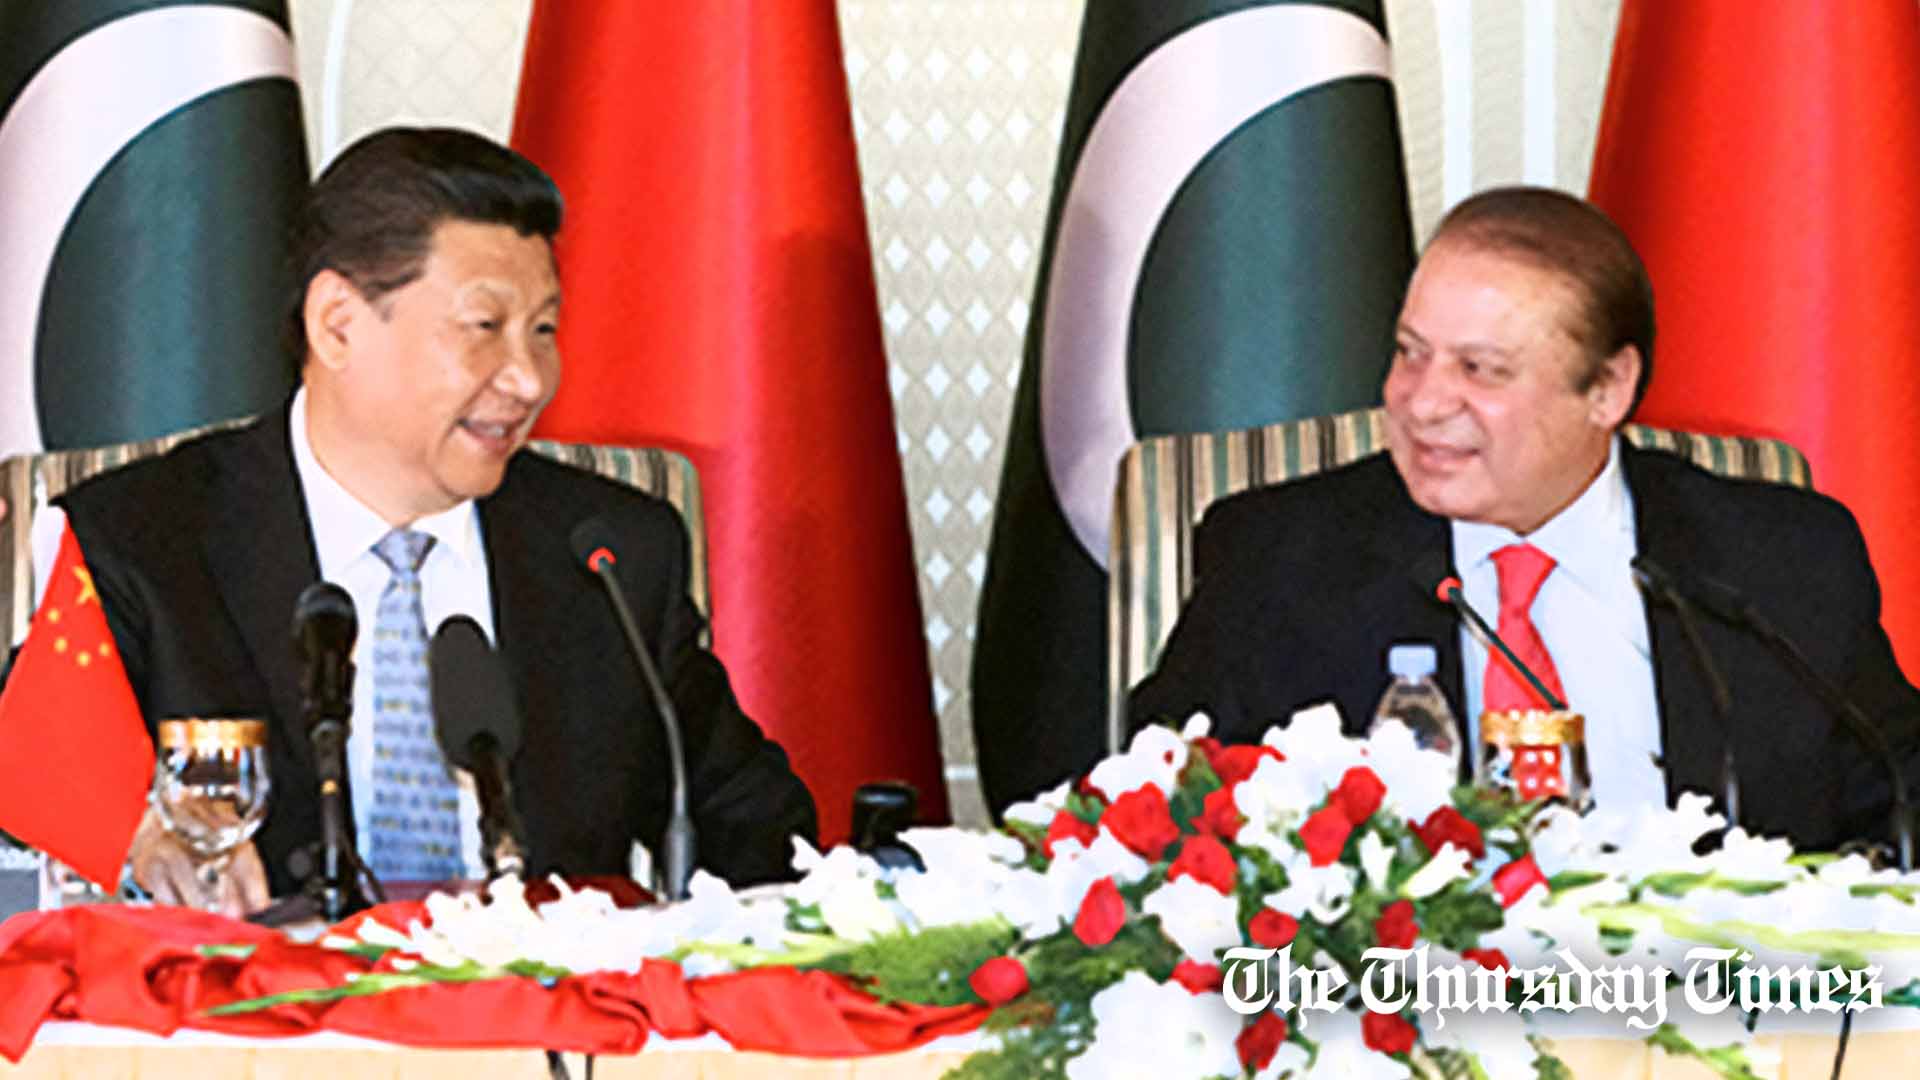 Chinese premier Xi Jinping is shown alongside PML(N) chief Nawaz Sharif at Islamabad in 2015. — FILE/THE THURSDAY TIMES